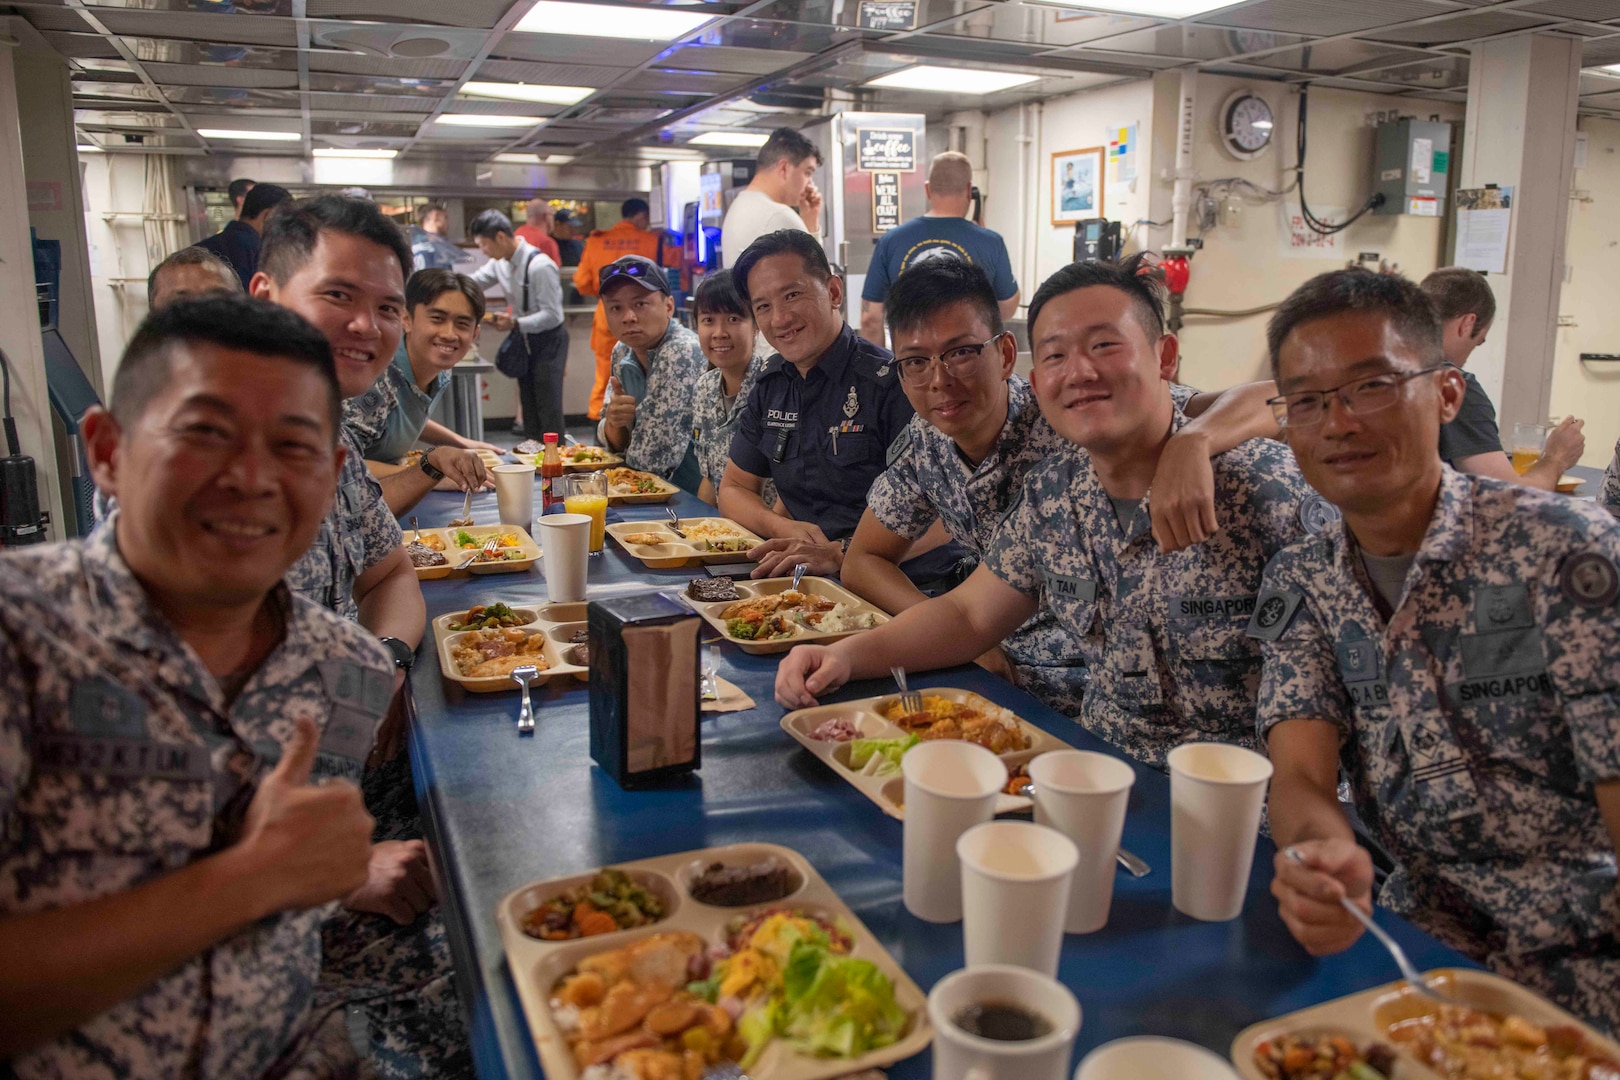 Members of the Republic of Singapore Navy pose for a photo while eating lunch onboard U.S. Coast Guard Cutter Bertholf (WMSL 750), March 3. Bertholf was in Malaysia for a multiple day engagement which directly supports U.S. foreign policy and national security objectives in the Indo-Pacific Strategy and the National Security Strategy. (U.S. Navy photo taken by Mass Communication Specialist 3rd Class Charlotte Duran)